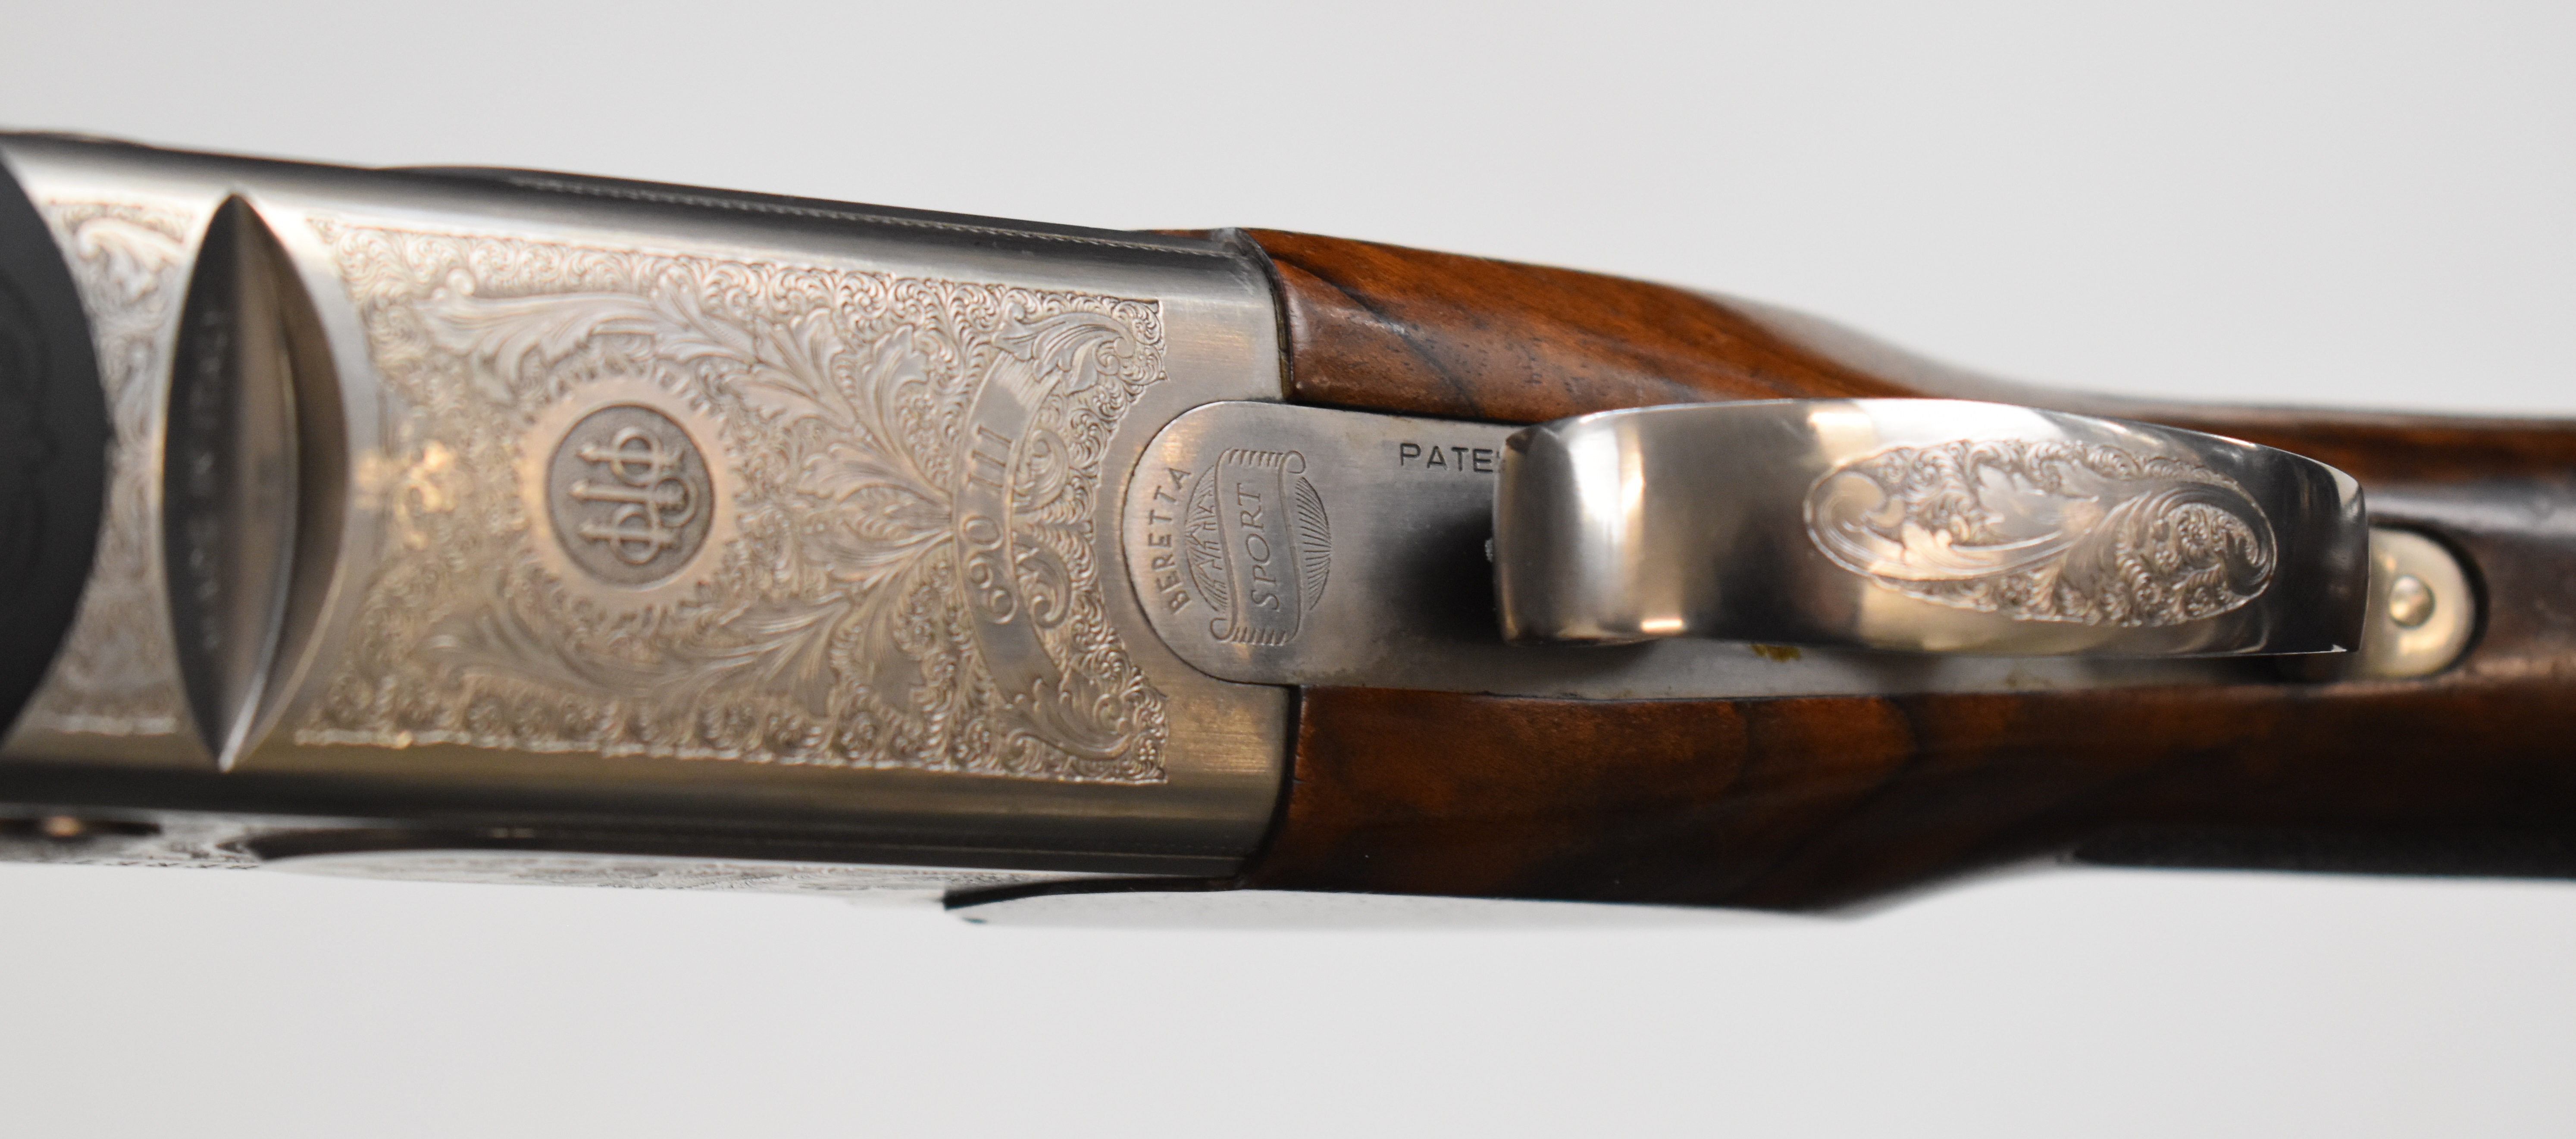 Beretta 690 III Sporting 12 bore over and under ejector shotgun with named and engraved scenes of - Image 11 of 15